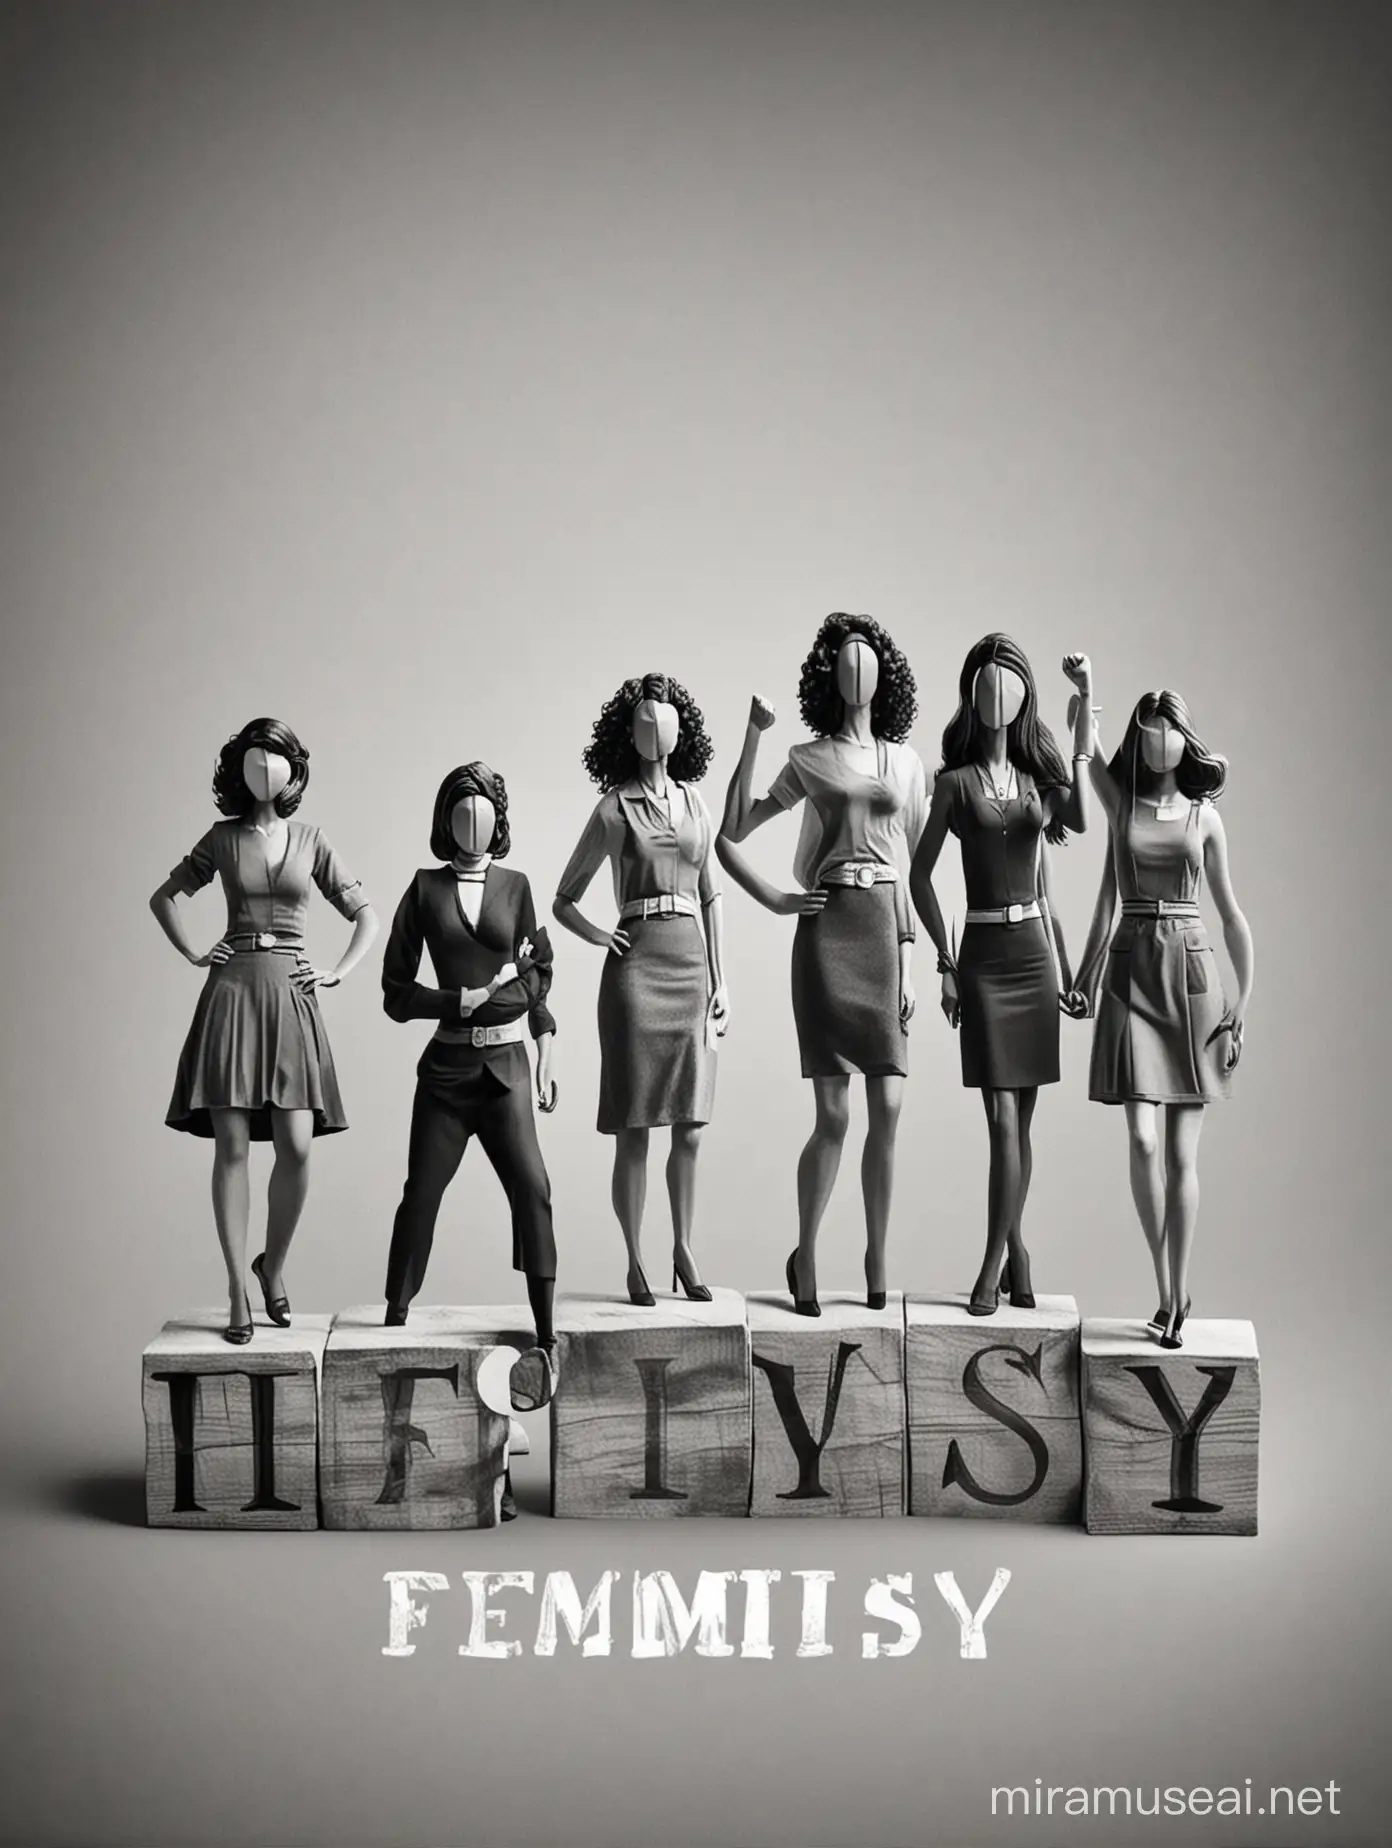 feminism, empowerment, group of women, value by achievement, rebellion, and team work